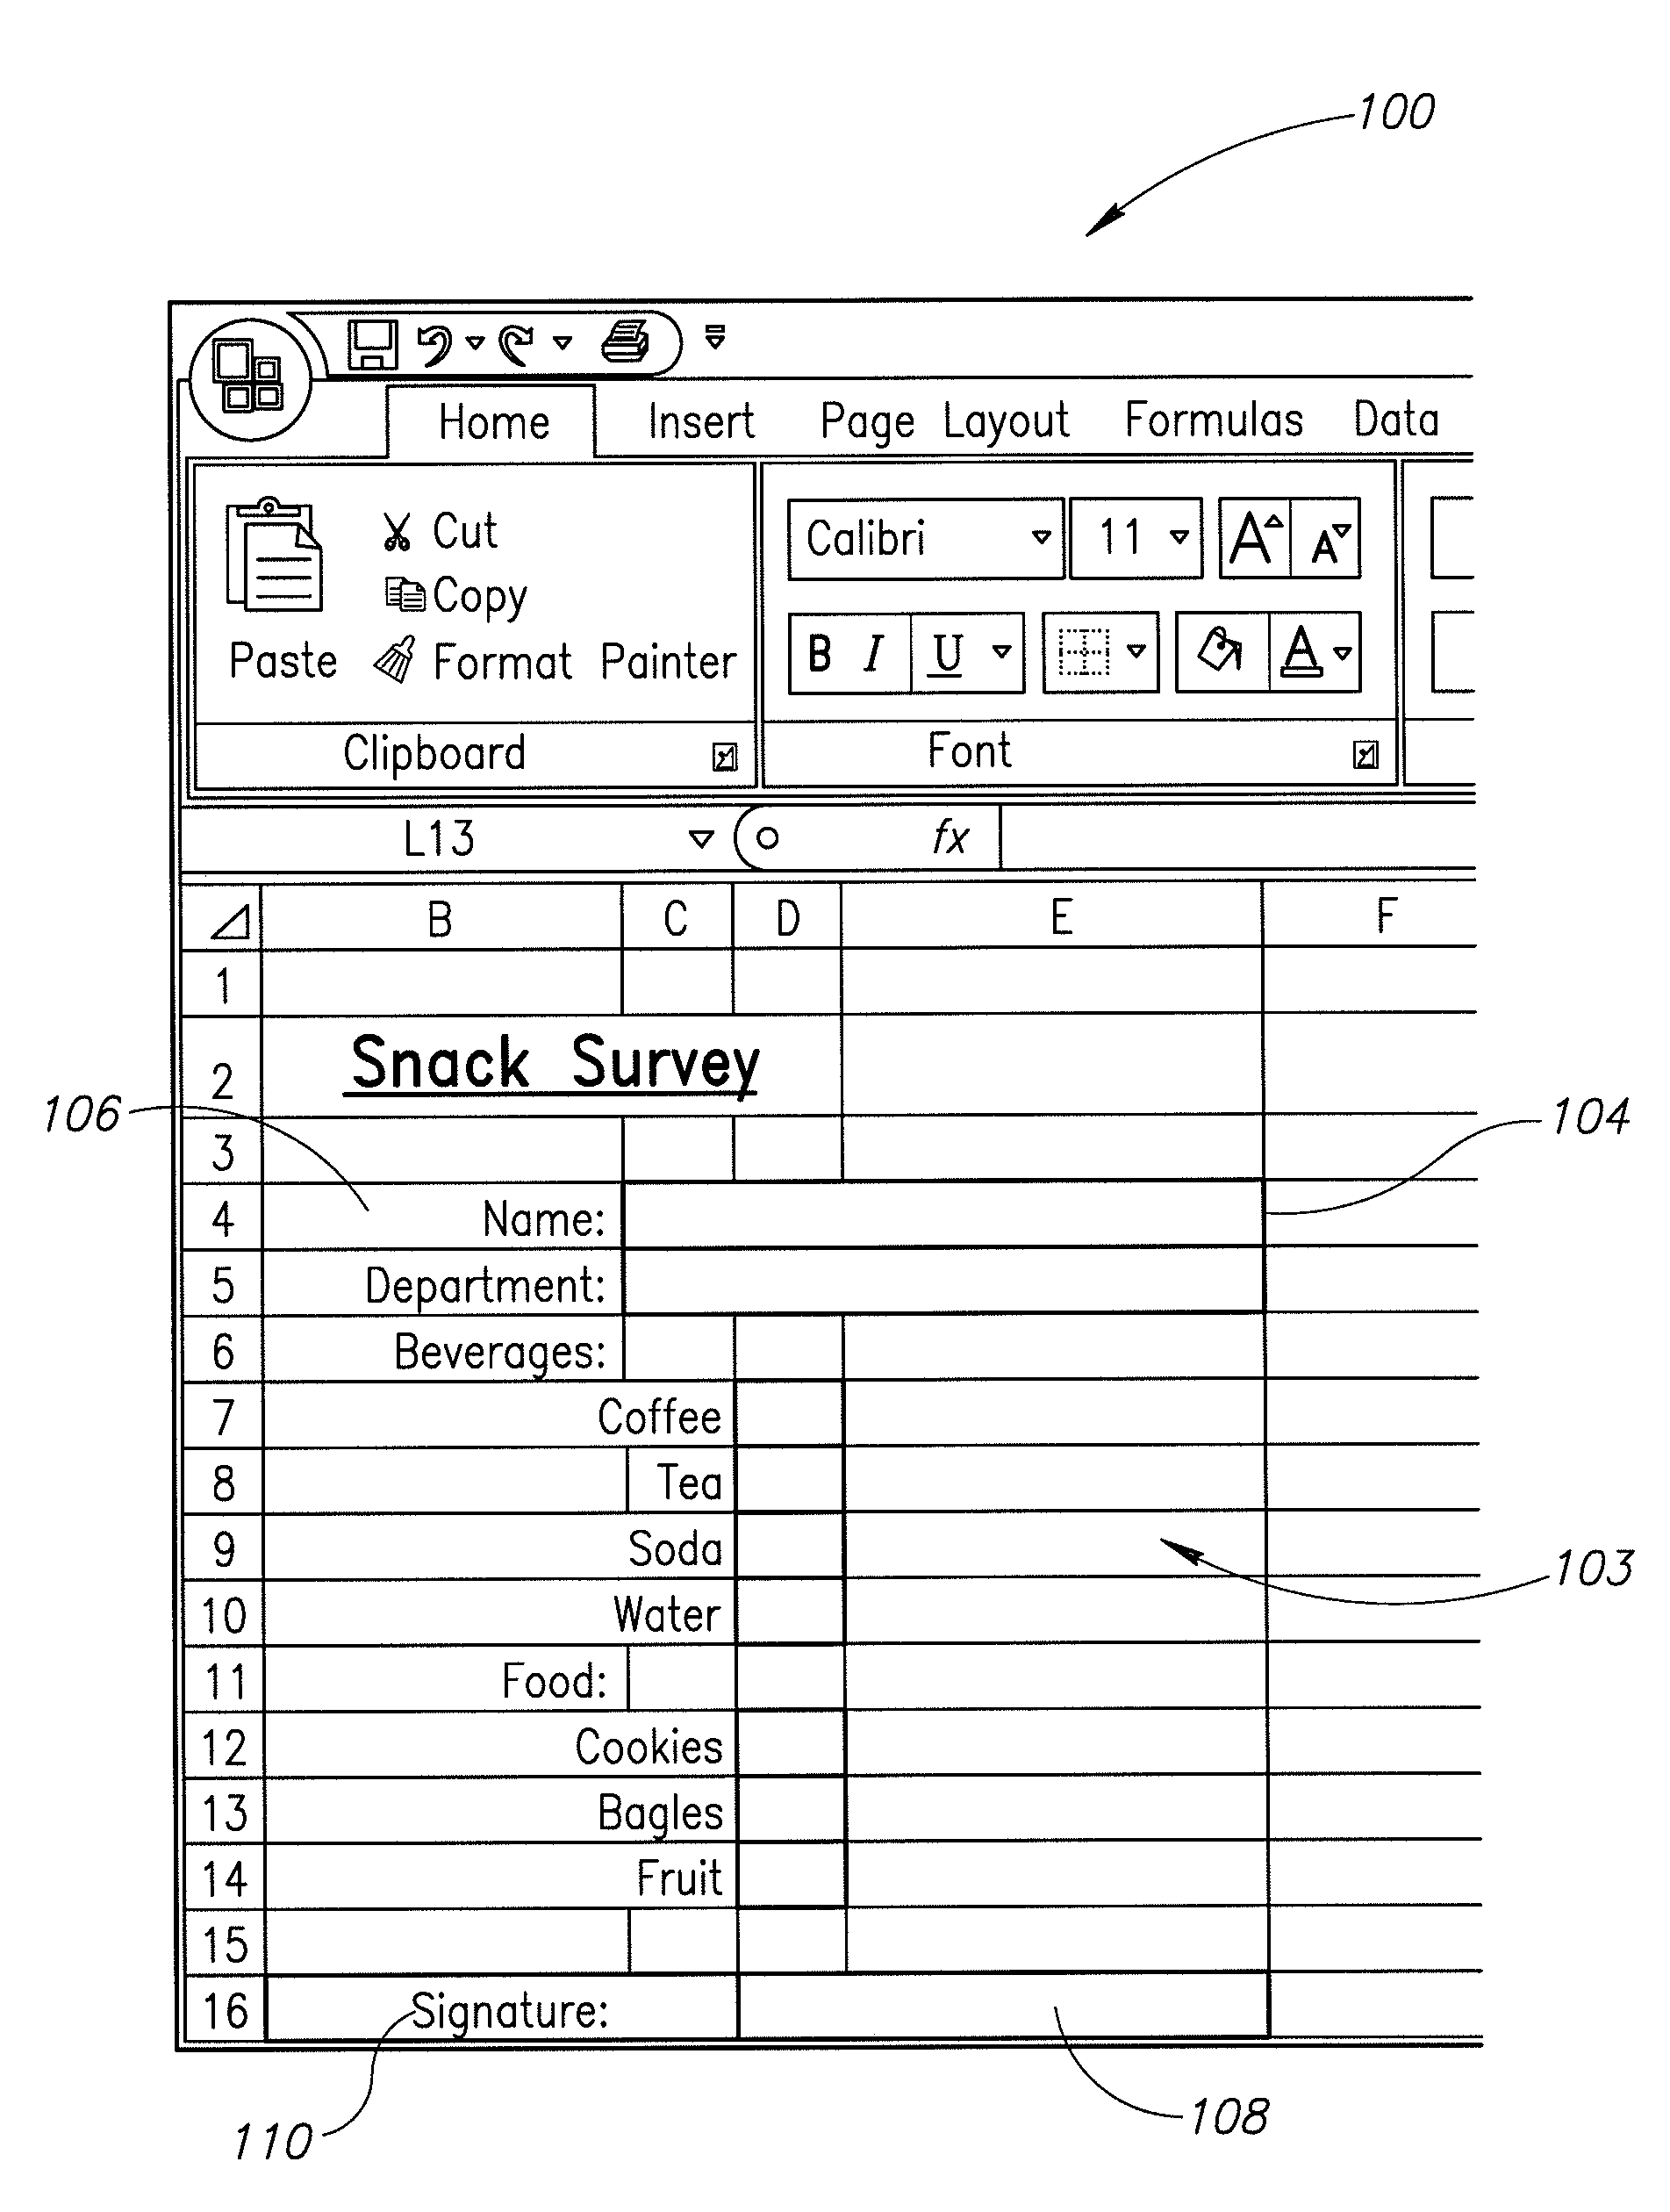 Digital paper-enabled spreadsheet systems